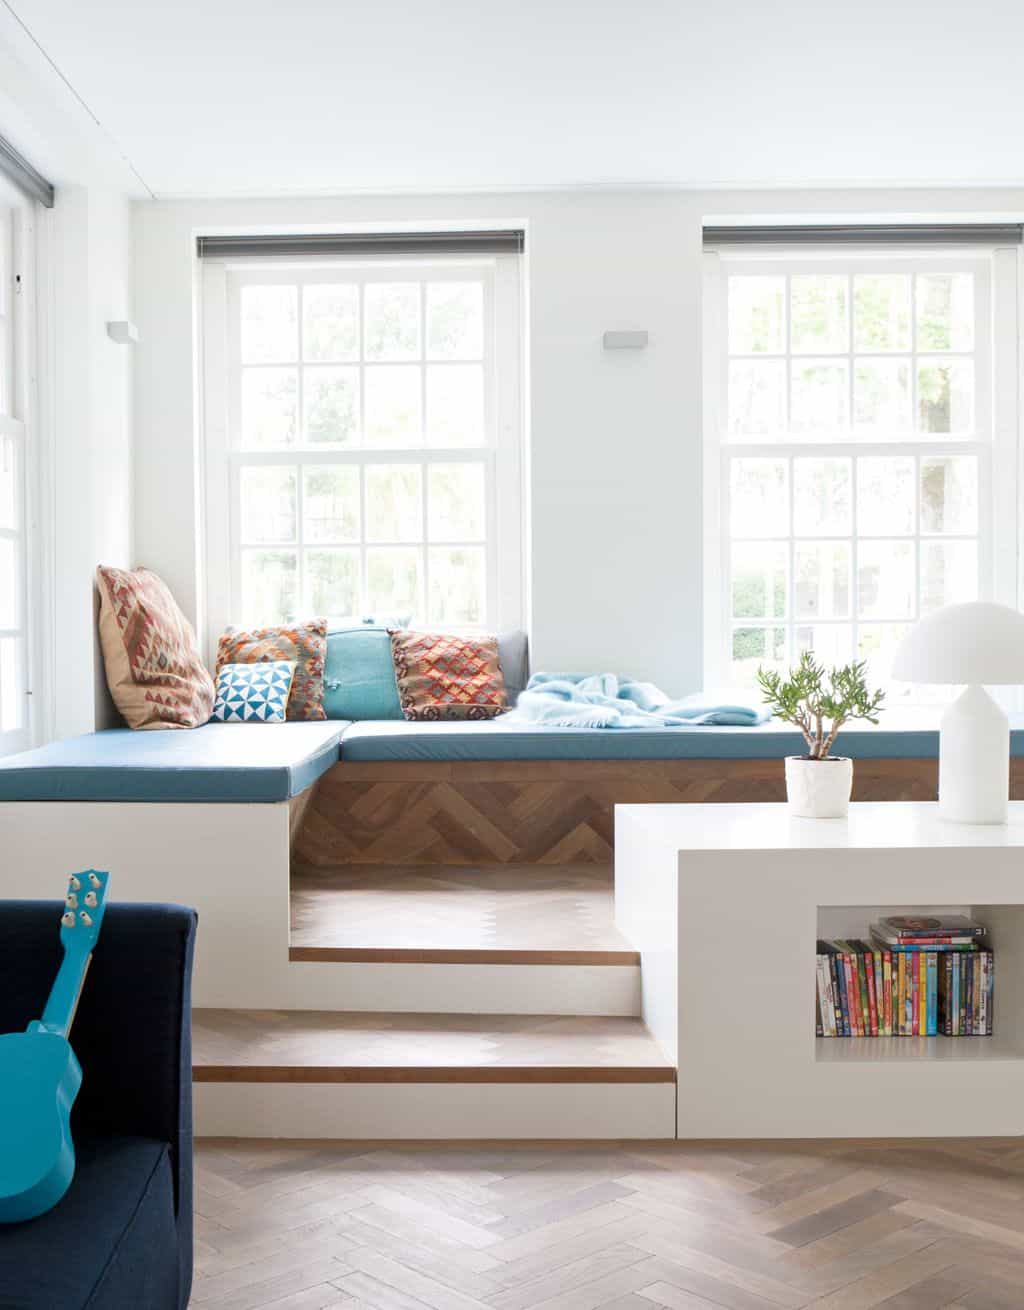 A living room filled with furniture and a window seat
